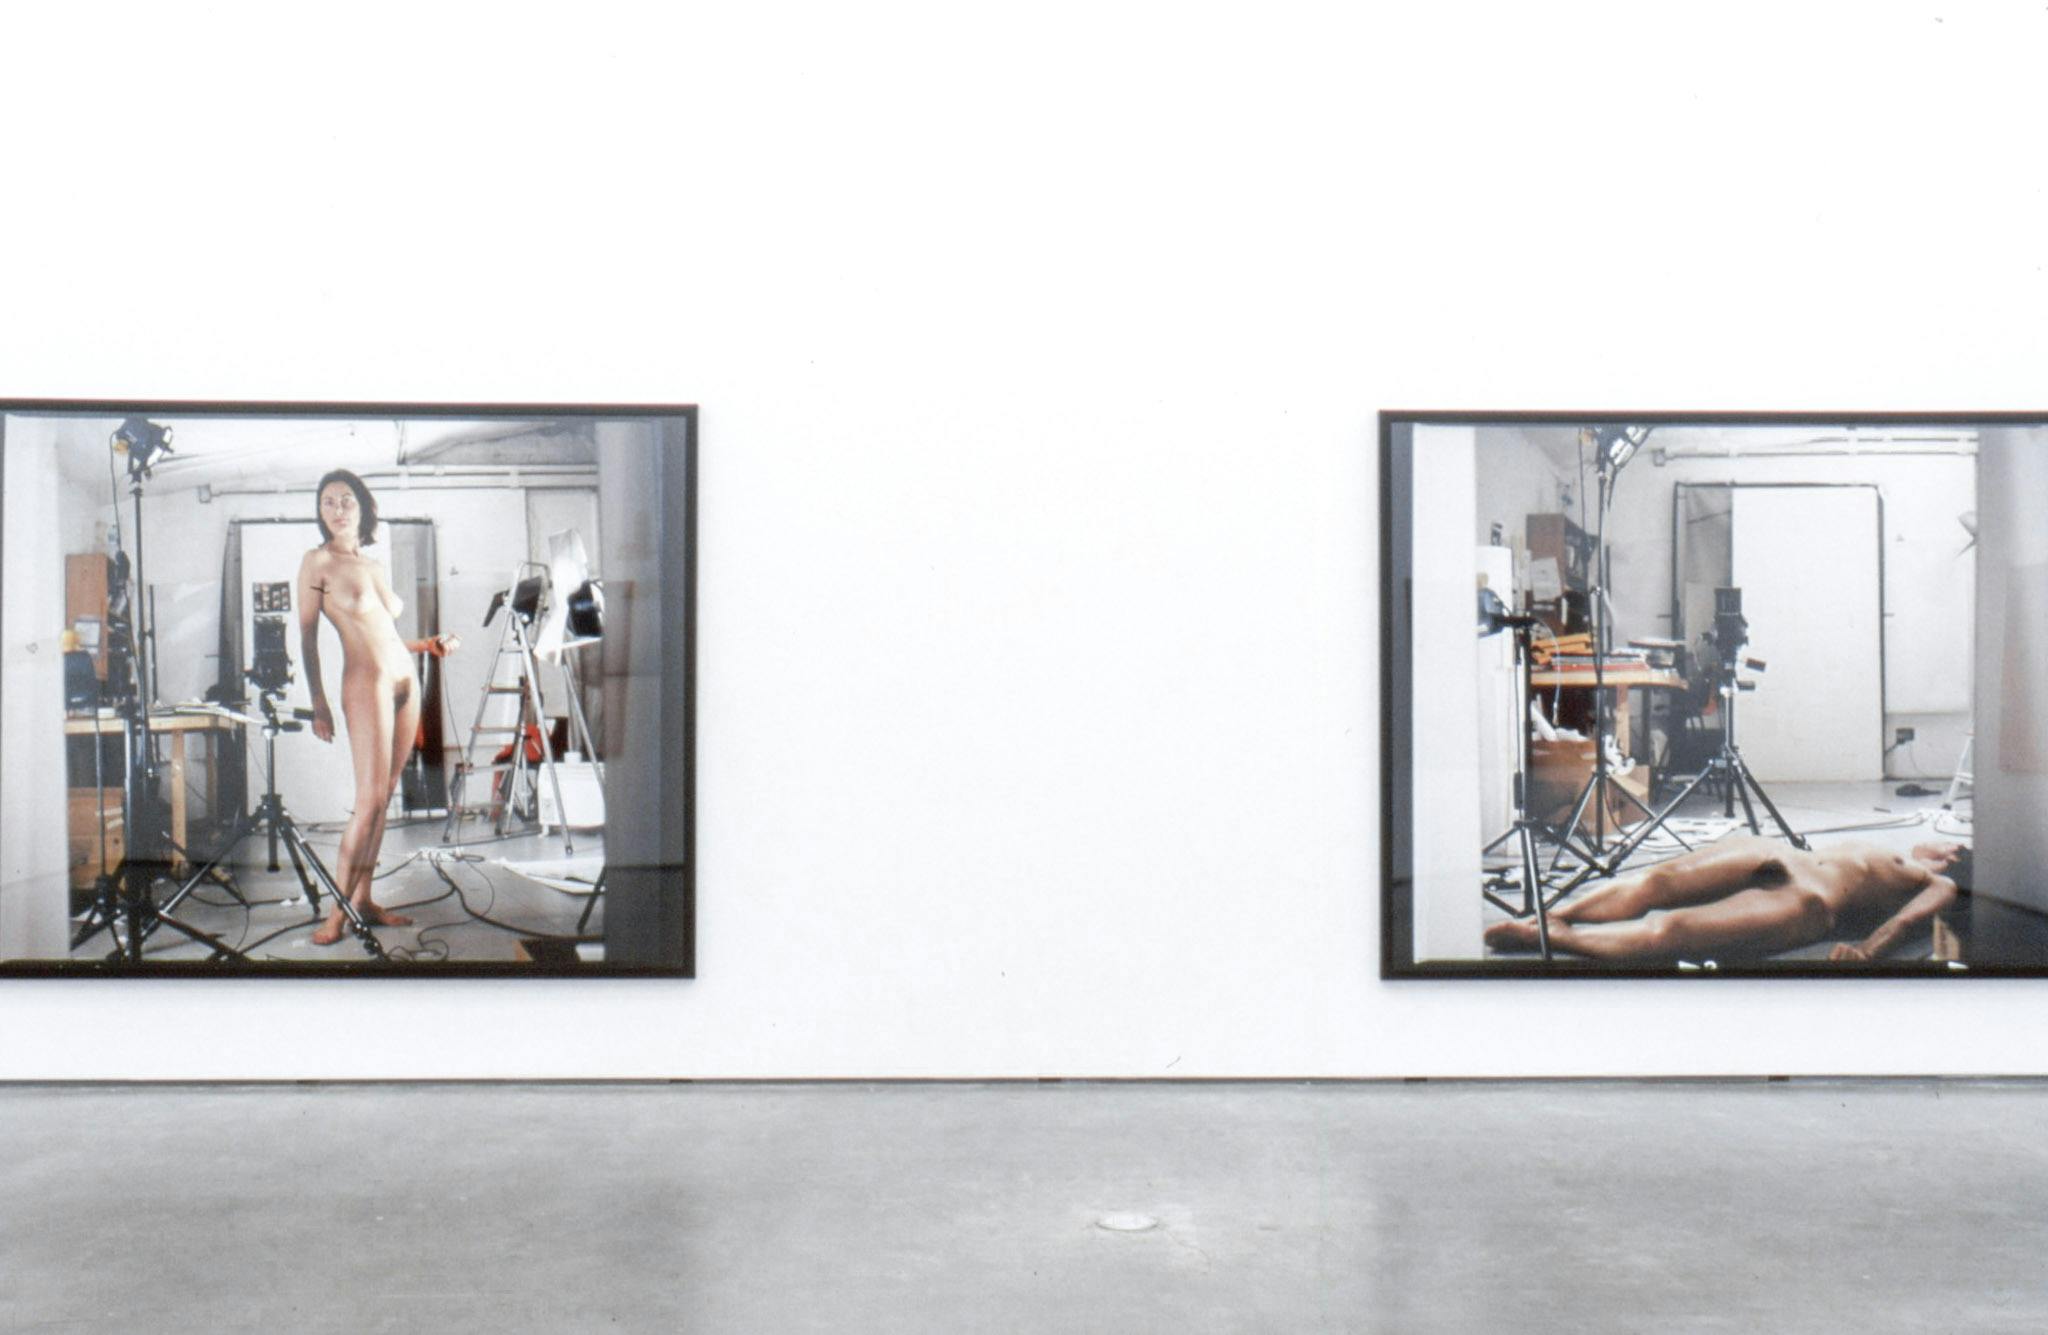 Two large-sized photographs are installed on a gallery wall. Both photographs show a naked woman posing in the middle of an artist studio. One image shows the person lying down on the floor.